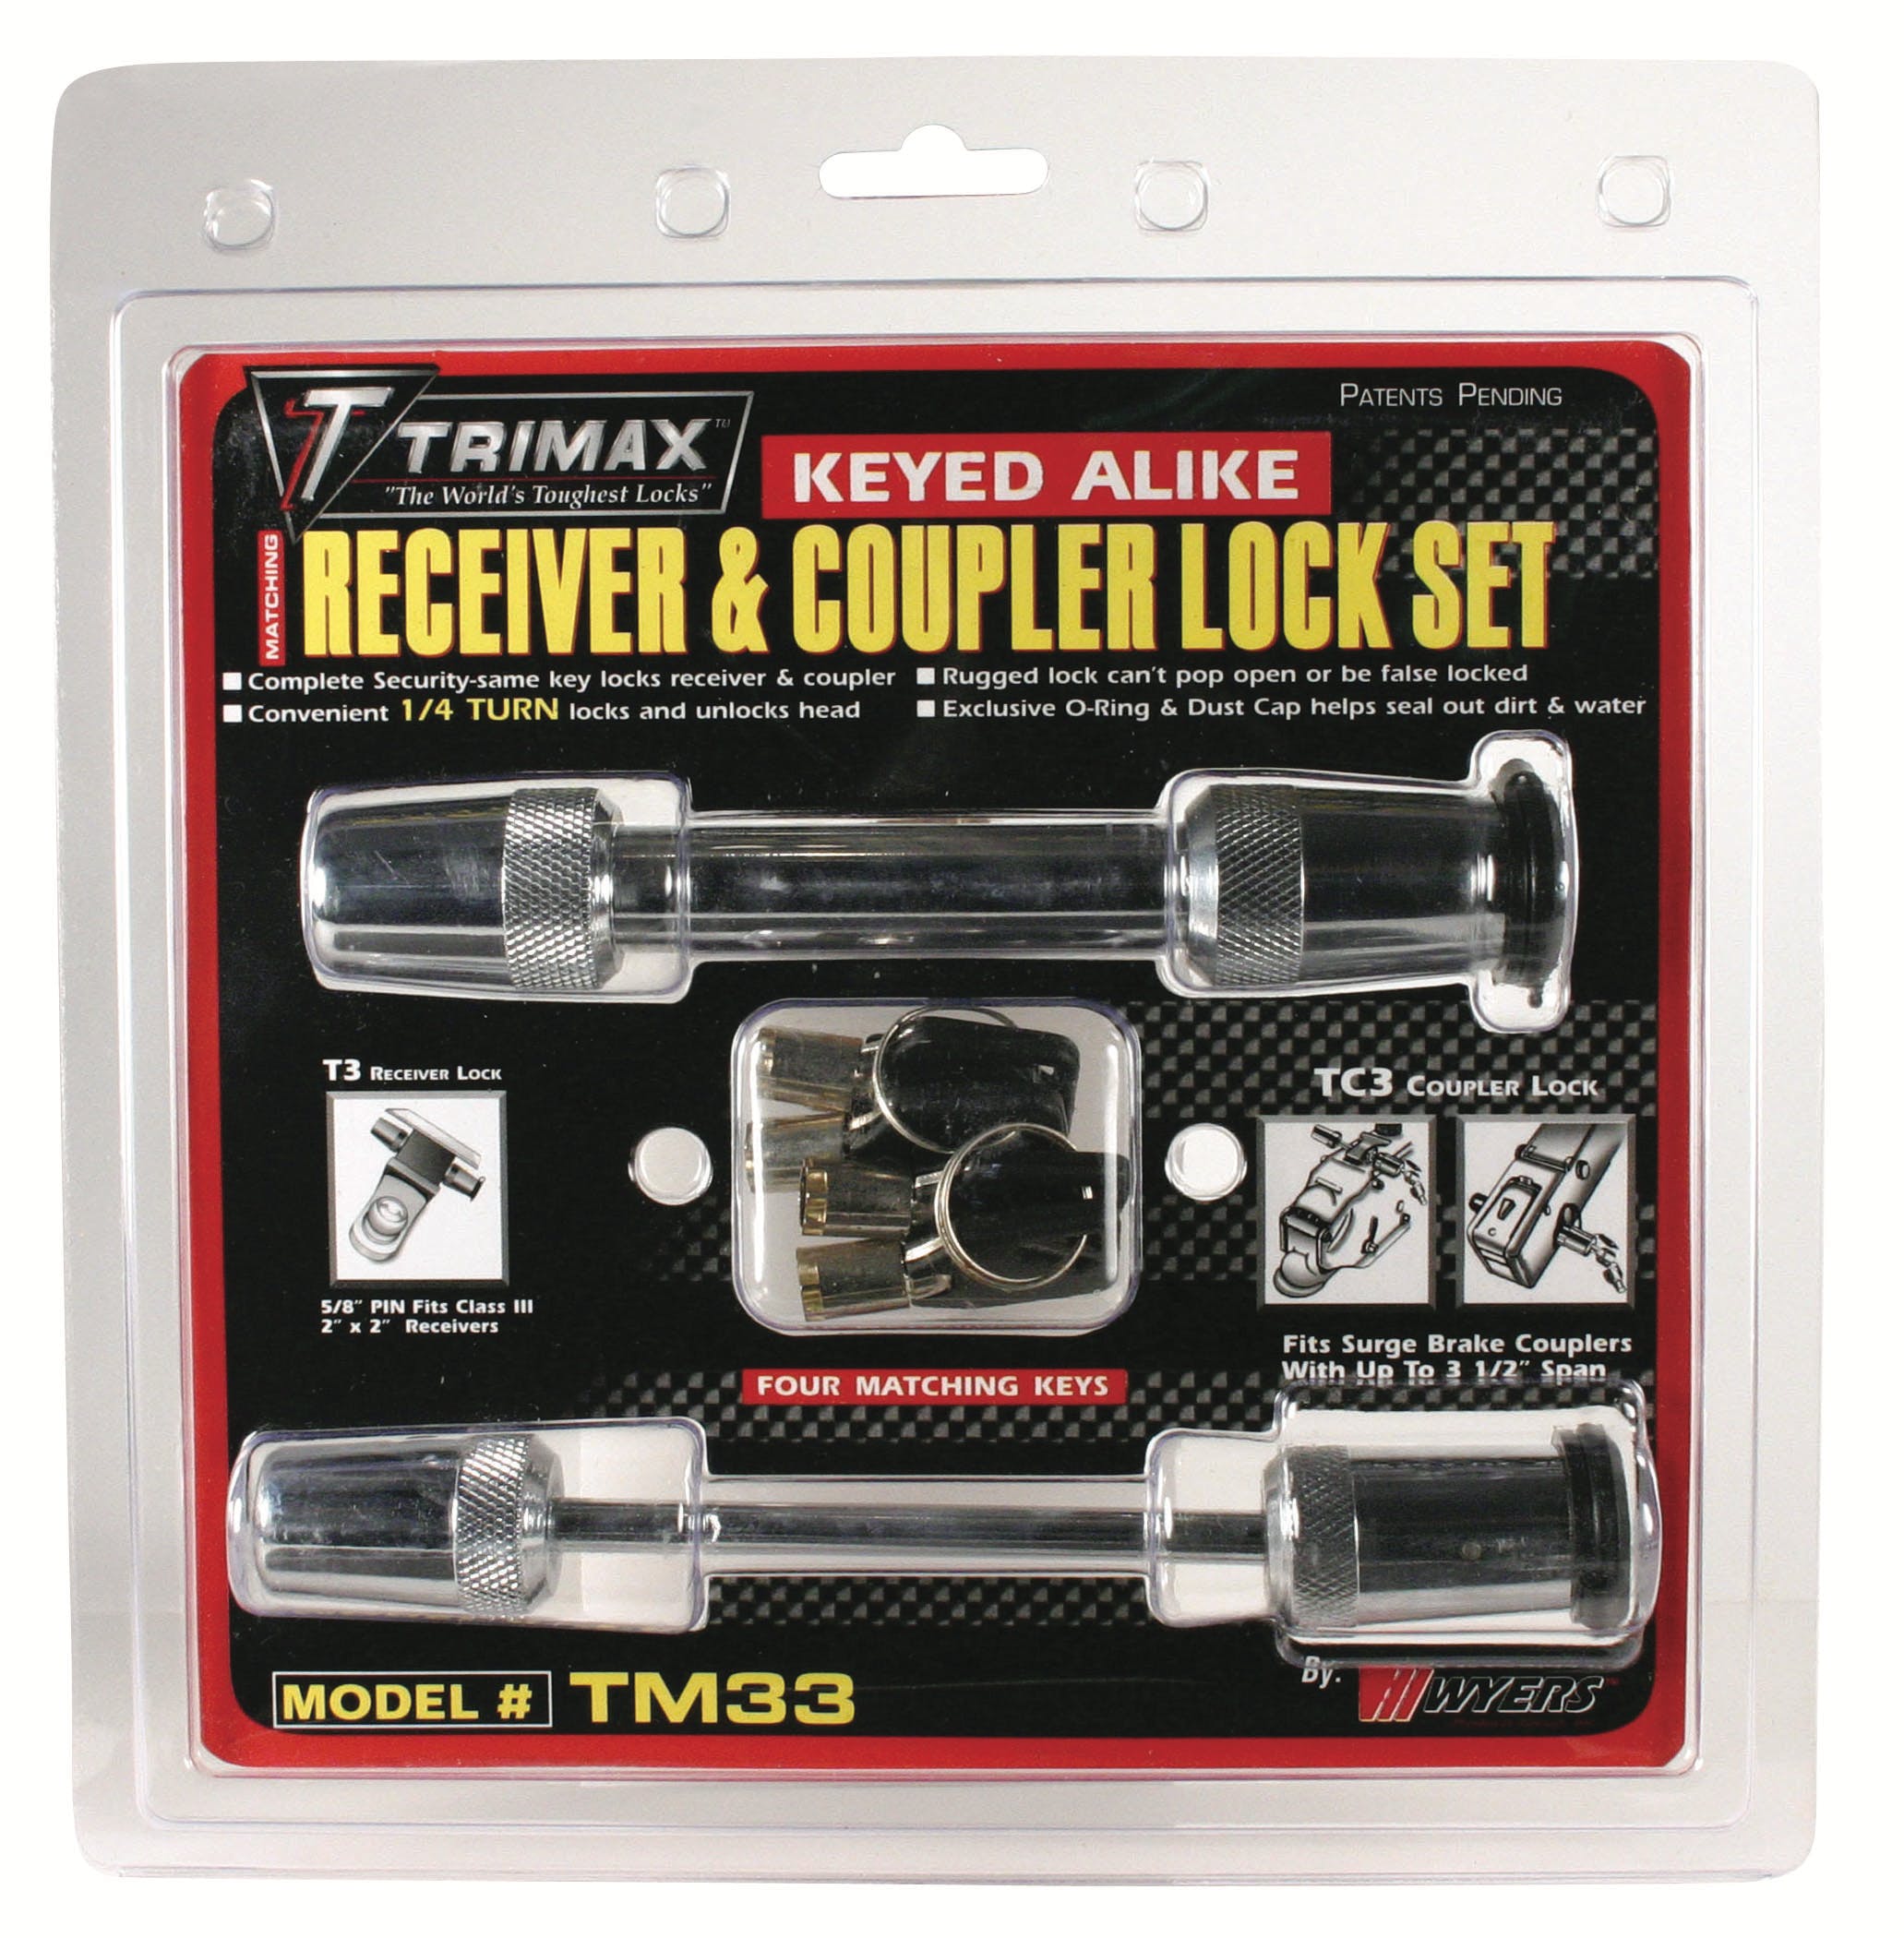 TRIMAX TM33 TRIMAX T3 - 5/8 inch Receiver and TC3 - 3-1/2 inch Span Coupler Lock